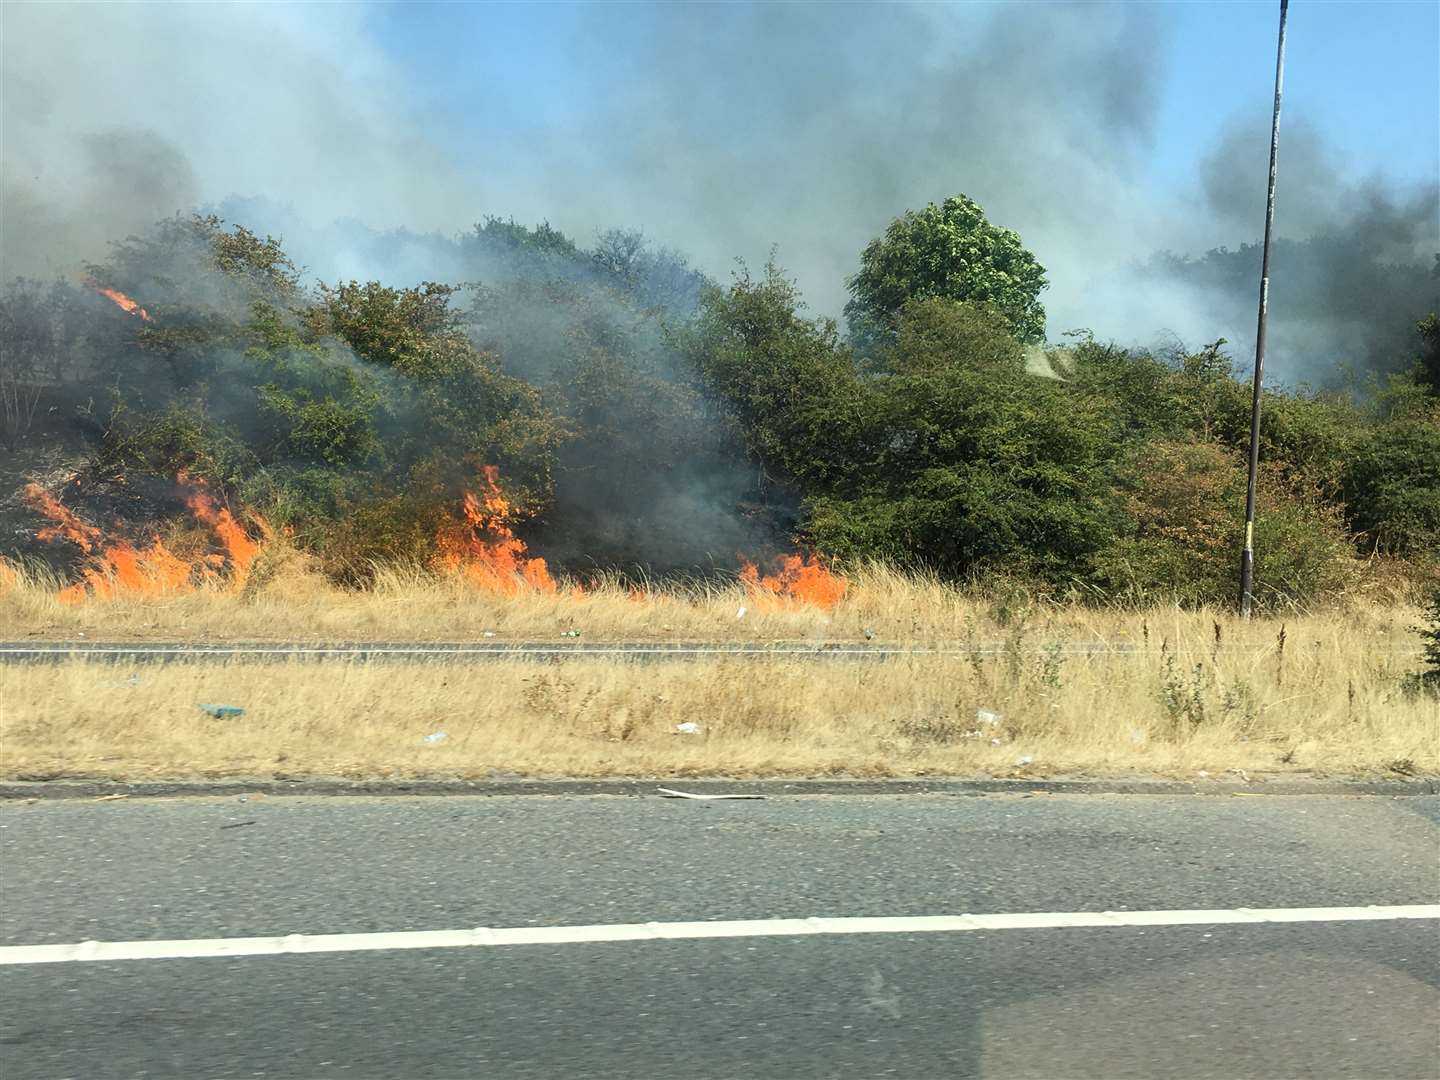 A bush fire by the A2 near Dartford. Images: Sue Pelling